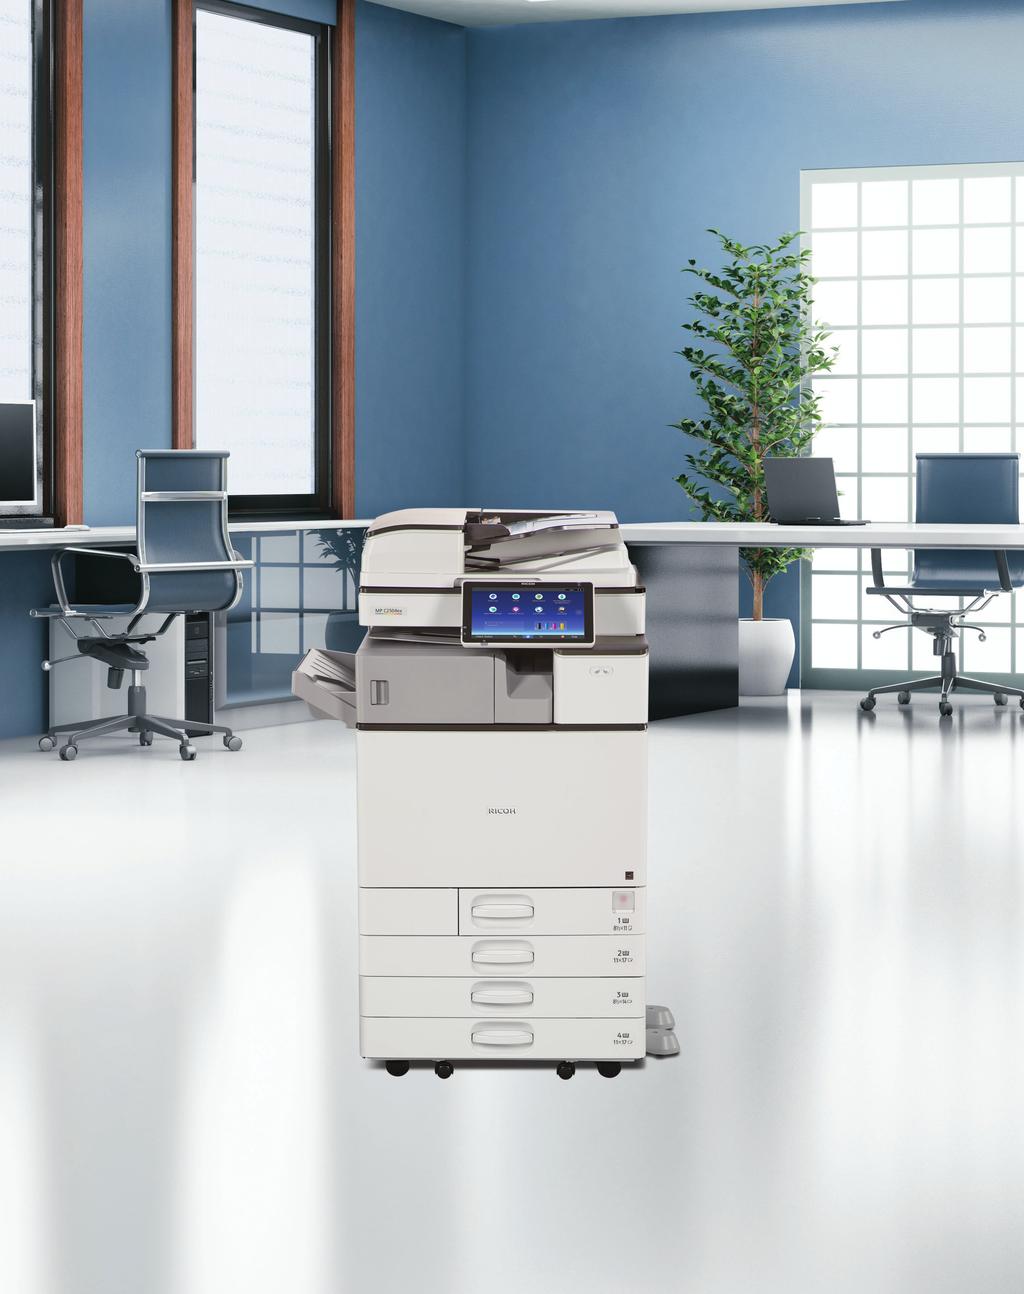 Choose the smartest way to share your best ideas You take pride in your work. You take it personally. Maybe it s time for a multifunction printer (MFP) designed just for you.